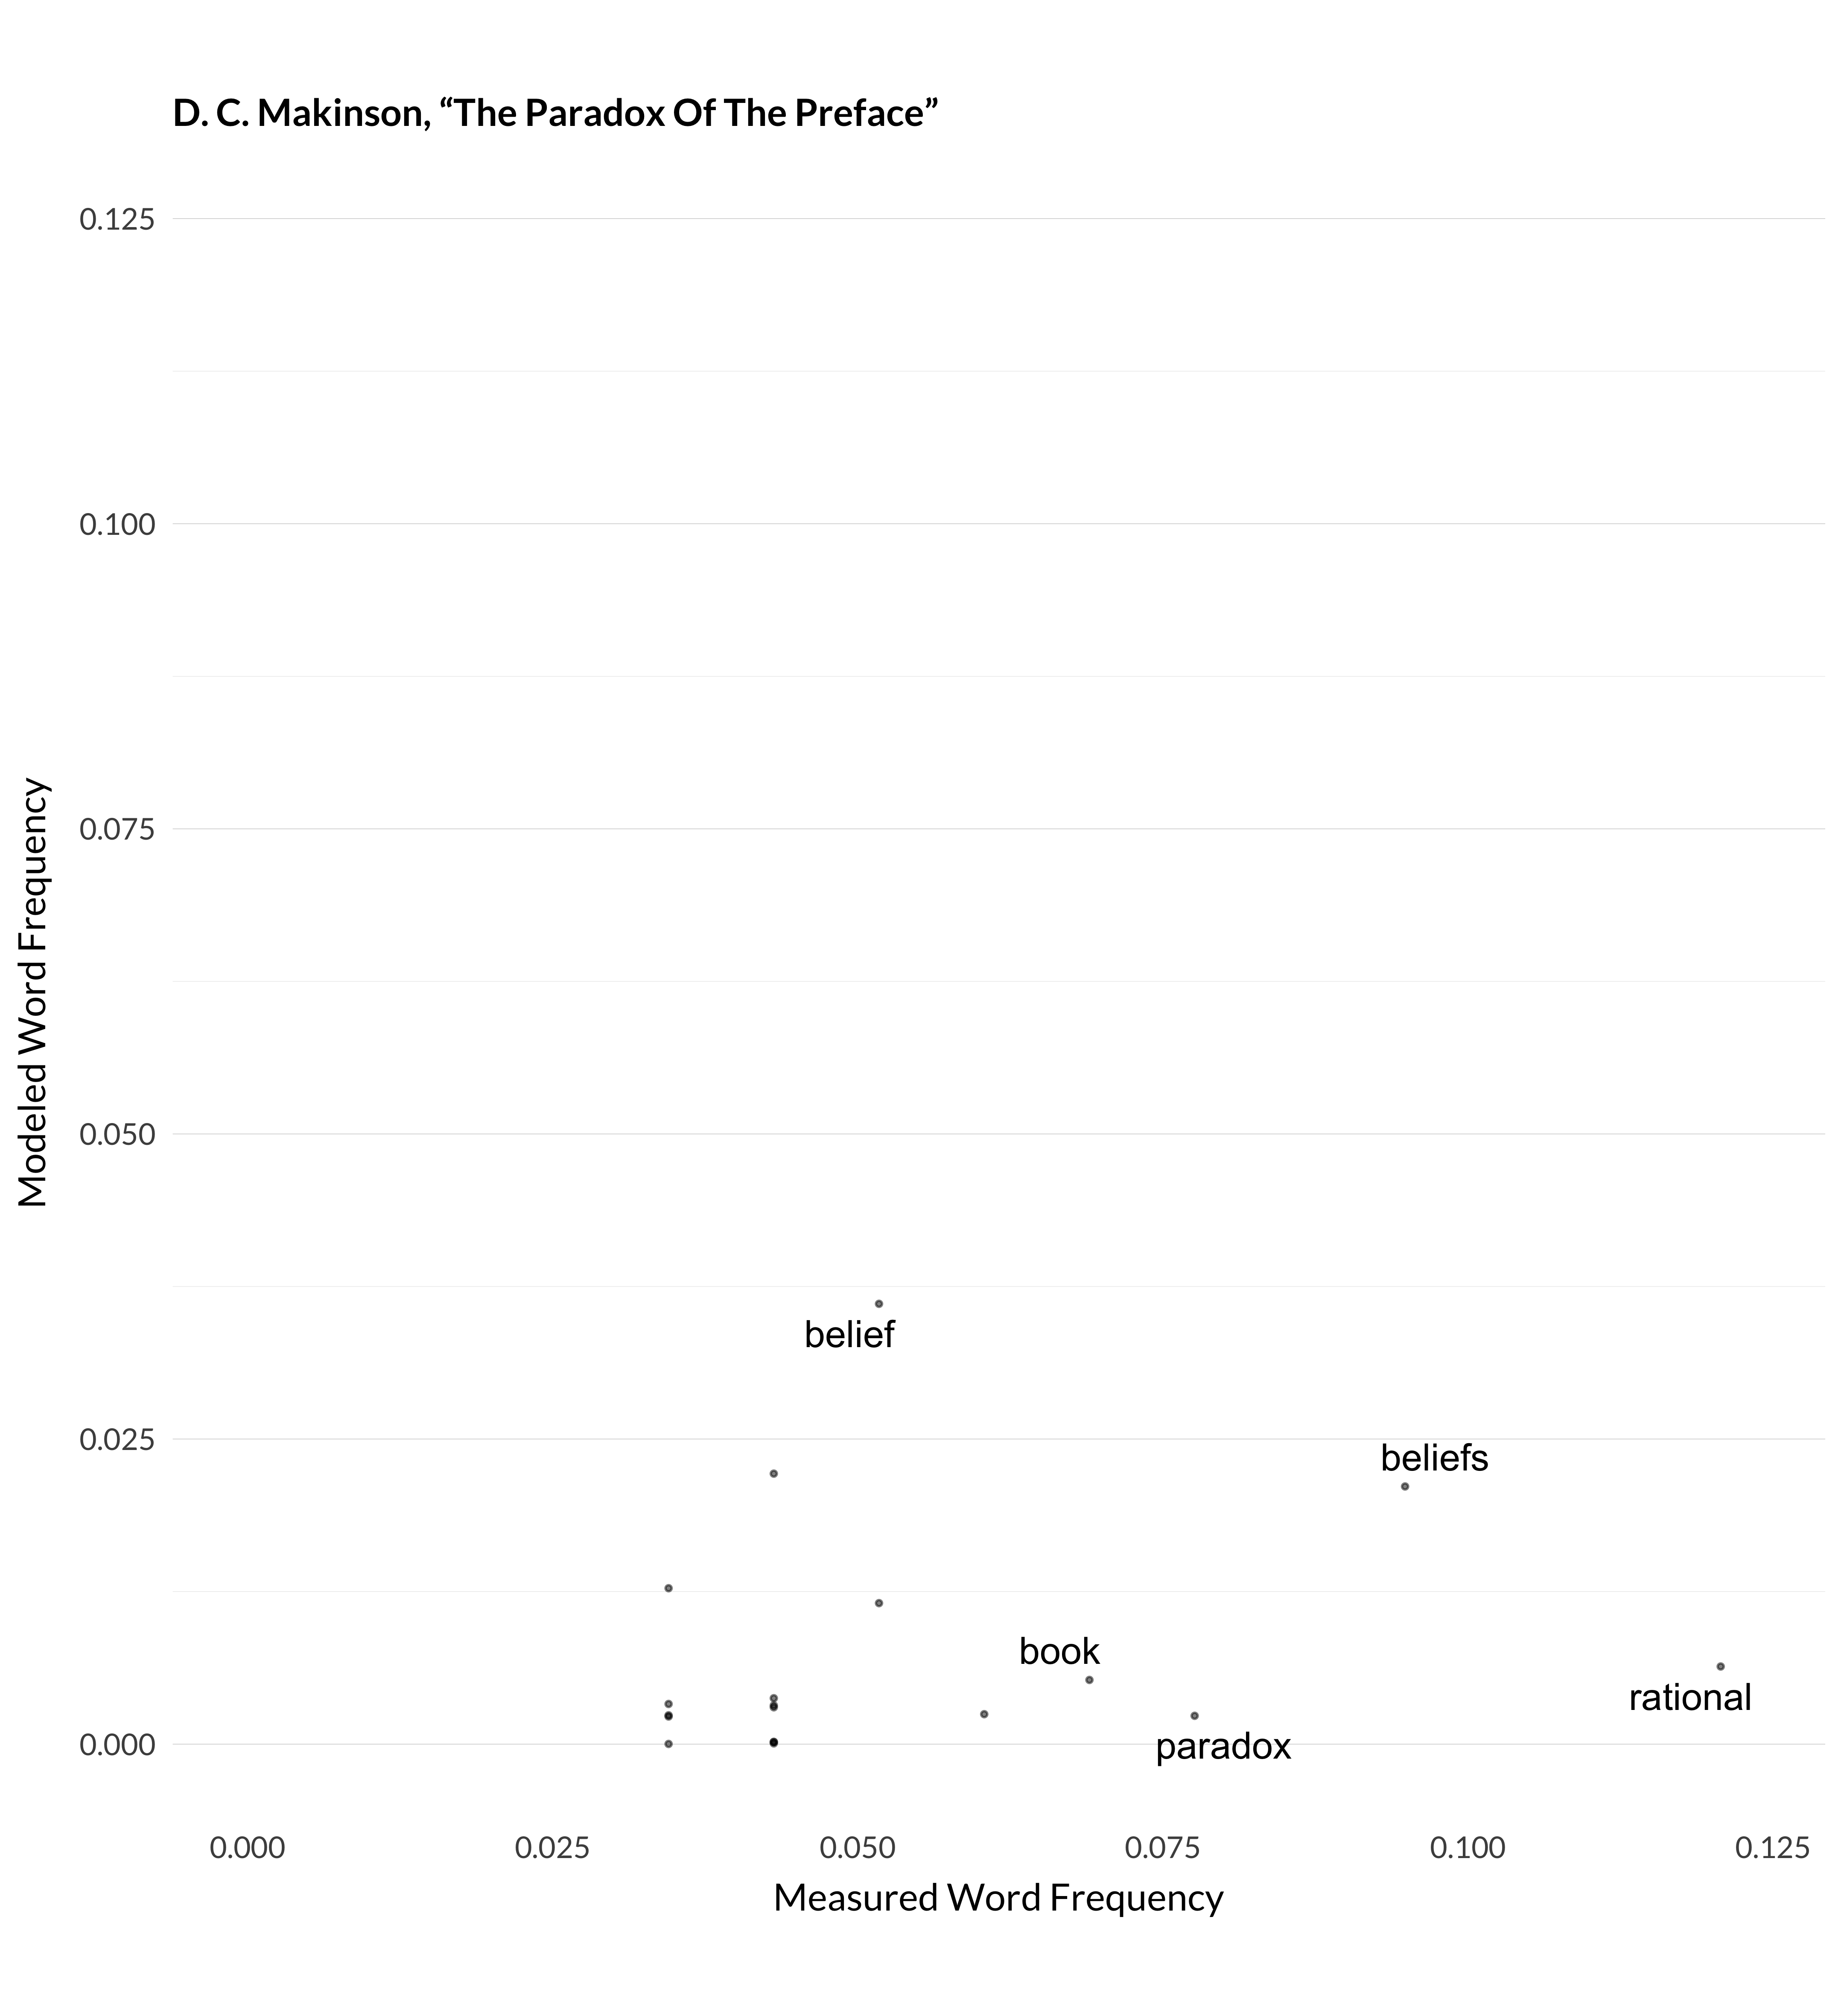 A scatterplot where the x axis shows how often each word appears in D. C. Makinson, 1965, “The Paradox of the Preface,” Analysis 25:205–7., and the y axis shows how often the model anticipated that word to appear. Here the expectations are rarely met. The words rational, beliefs, belief, paradox, book are highlighted. Each of them is well below the forty-five degree line. That means they appear in the article more often than the model expects. The word belief only appears a bit more often than expected, then others appear much more often.